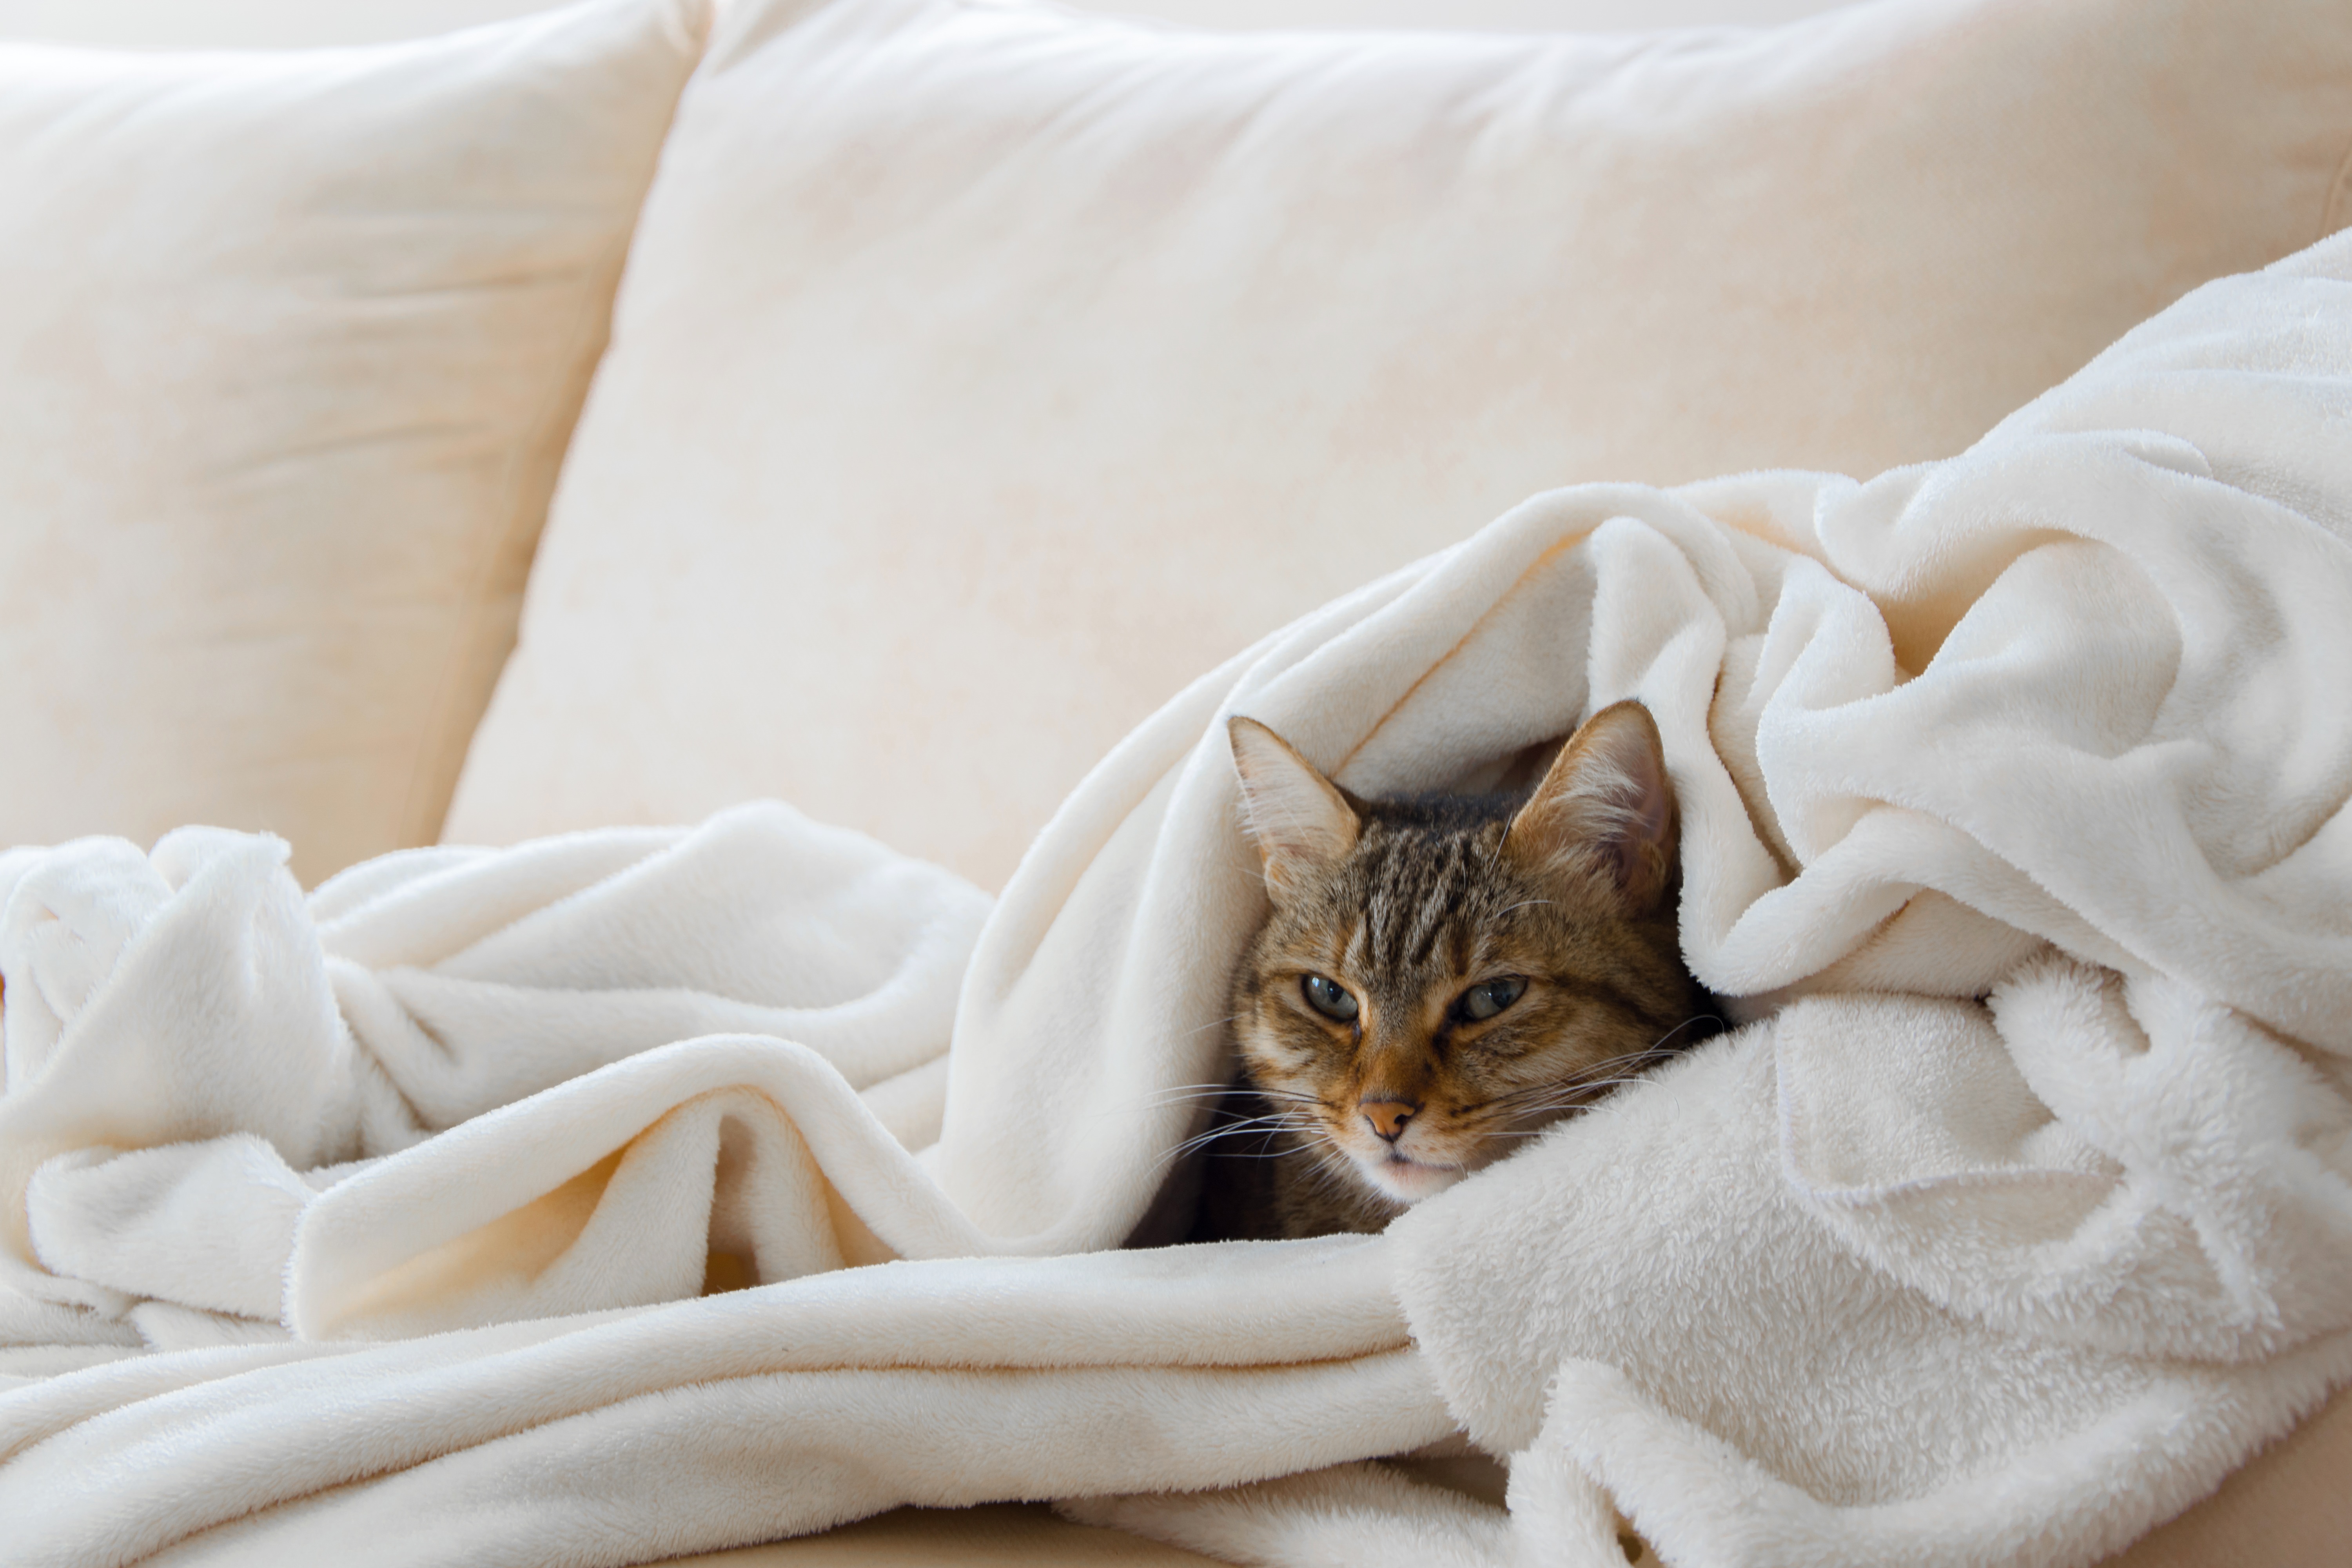 Do our furry friends feel the cold?